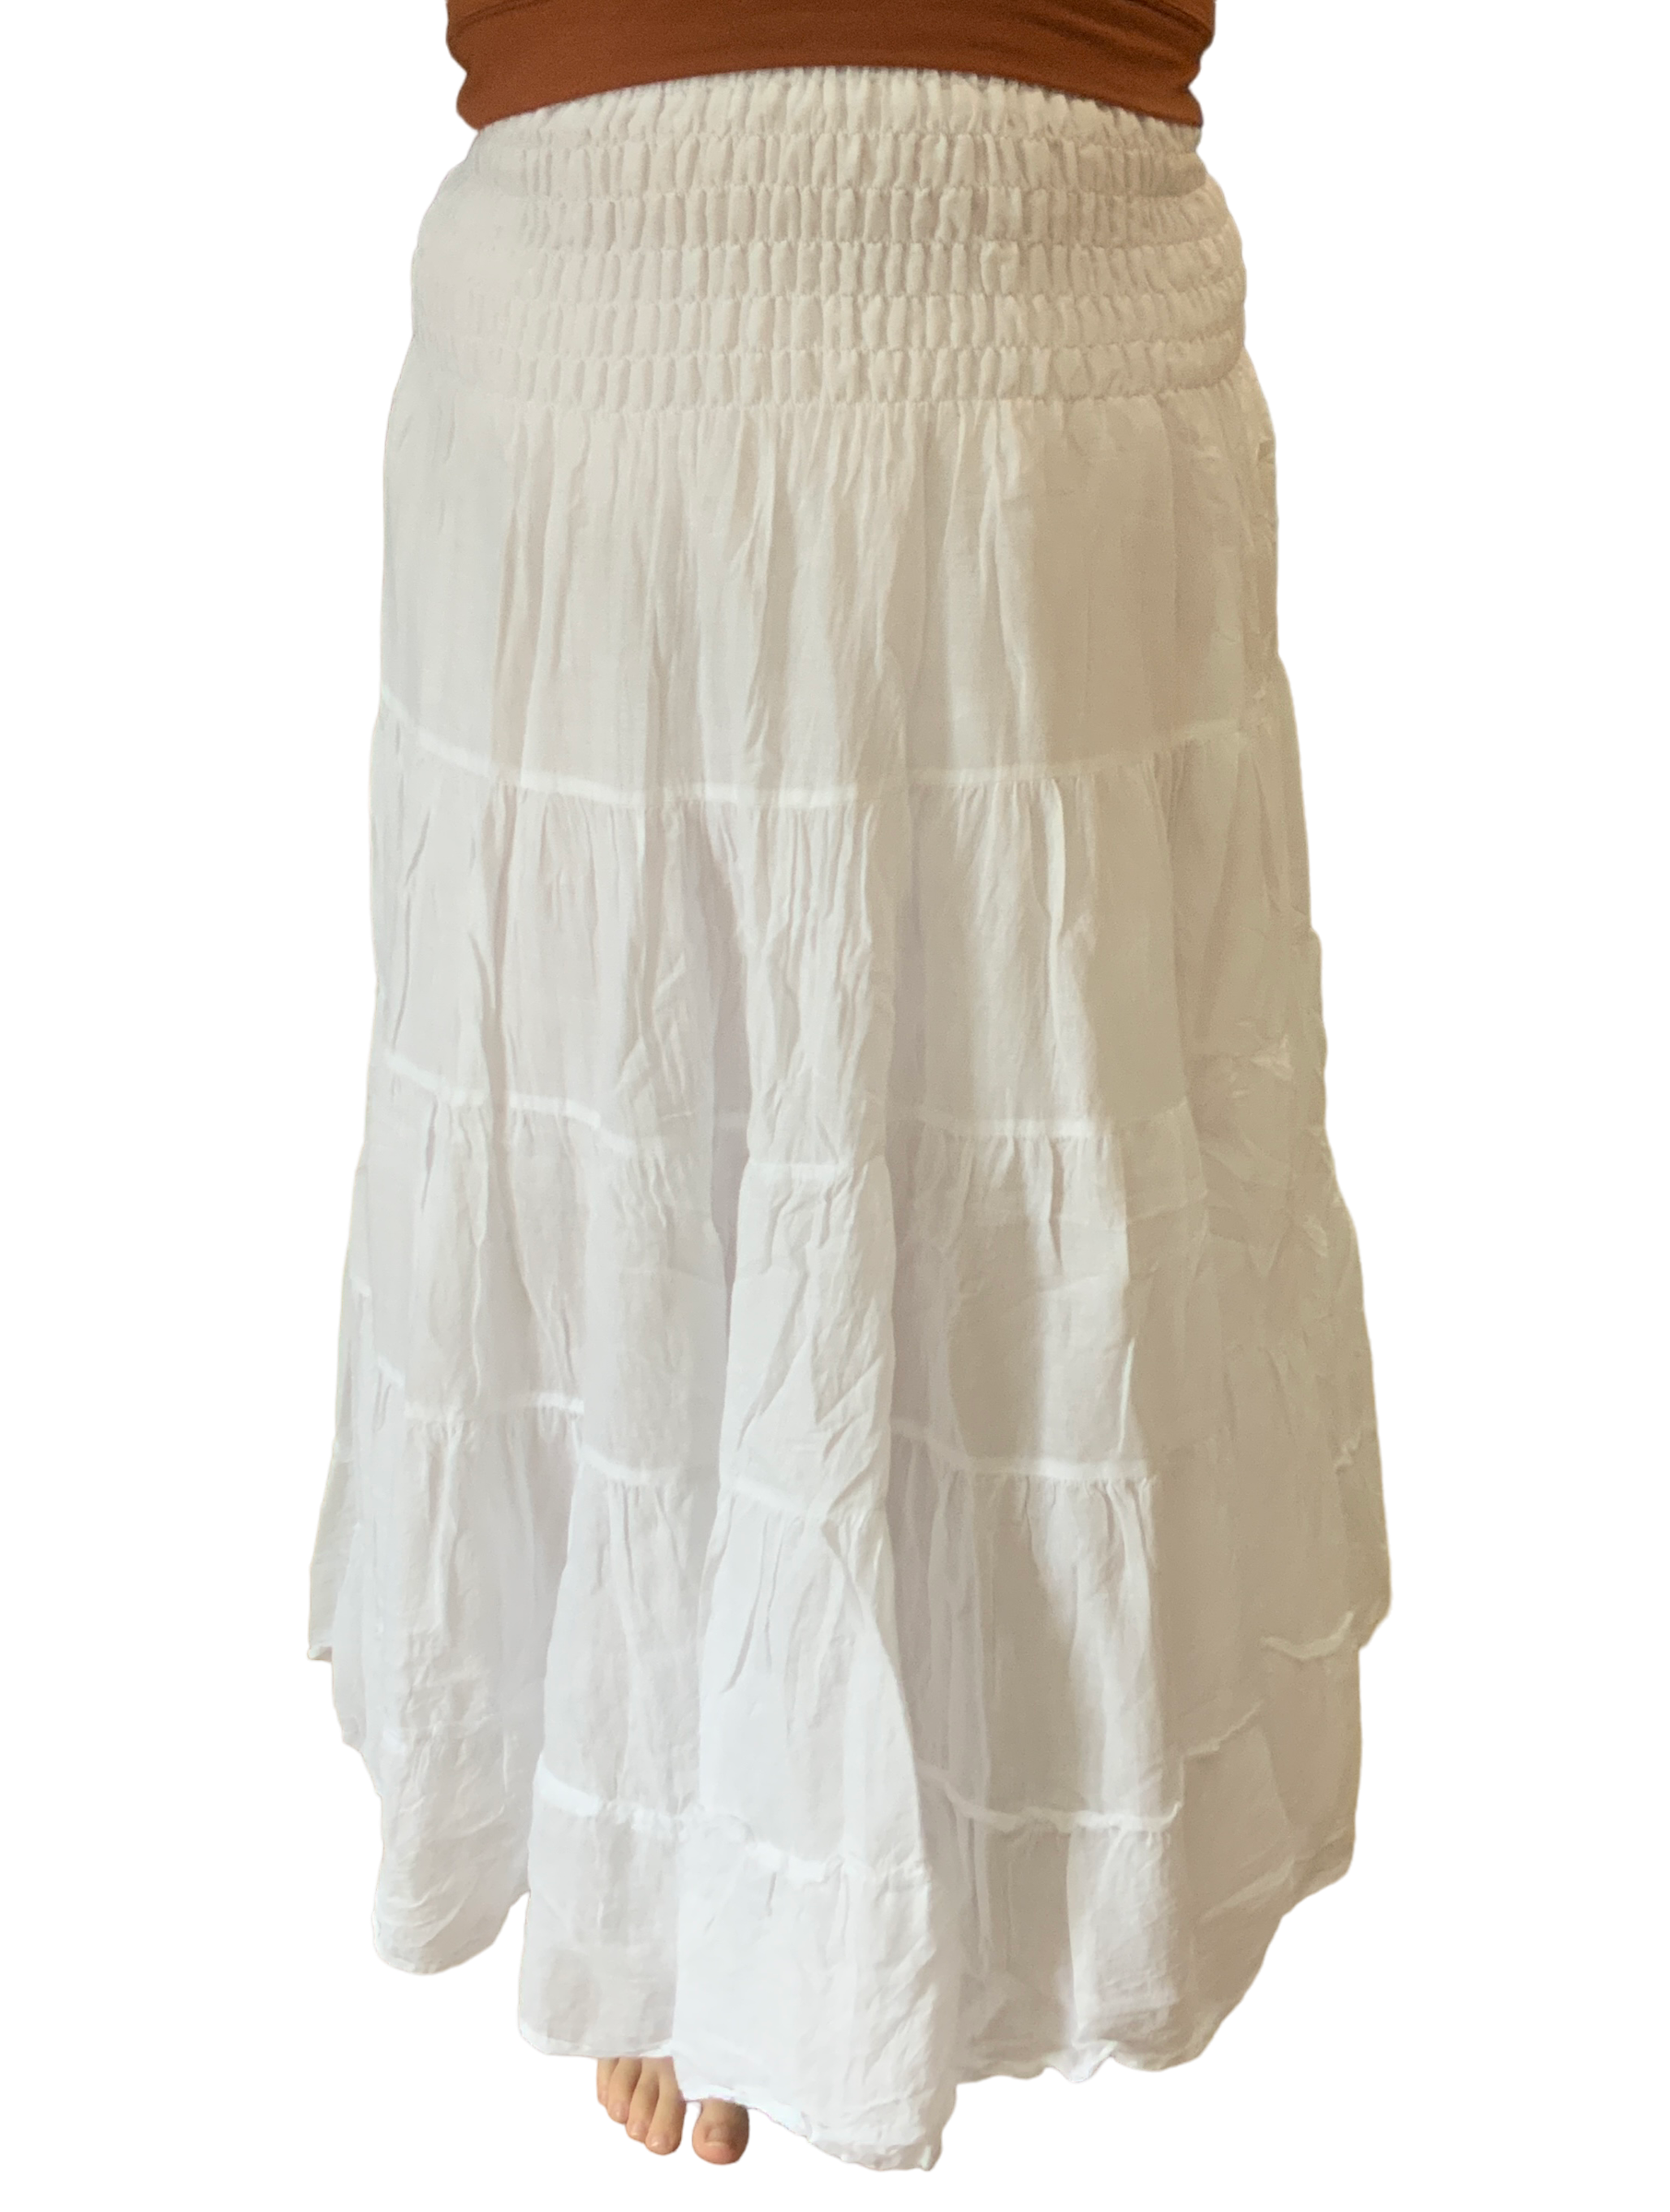 White Cotton Voile Tiered Skirt